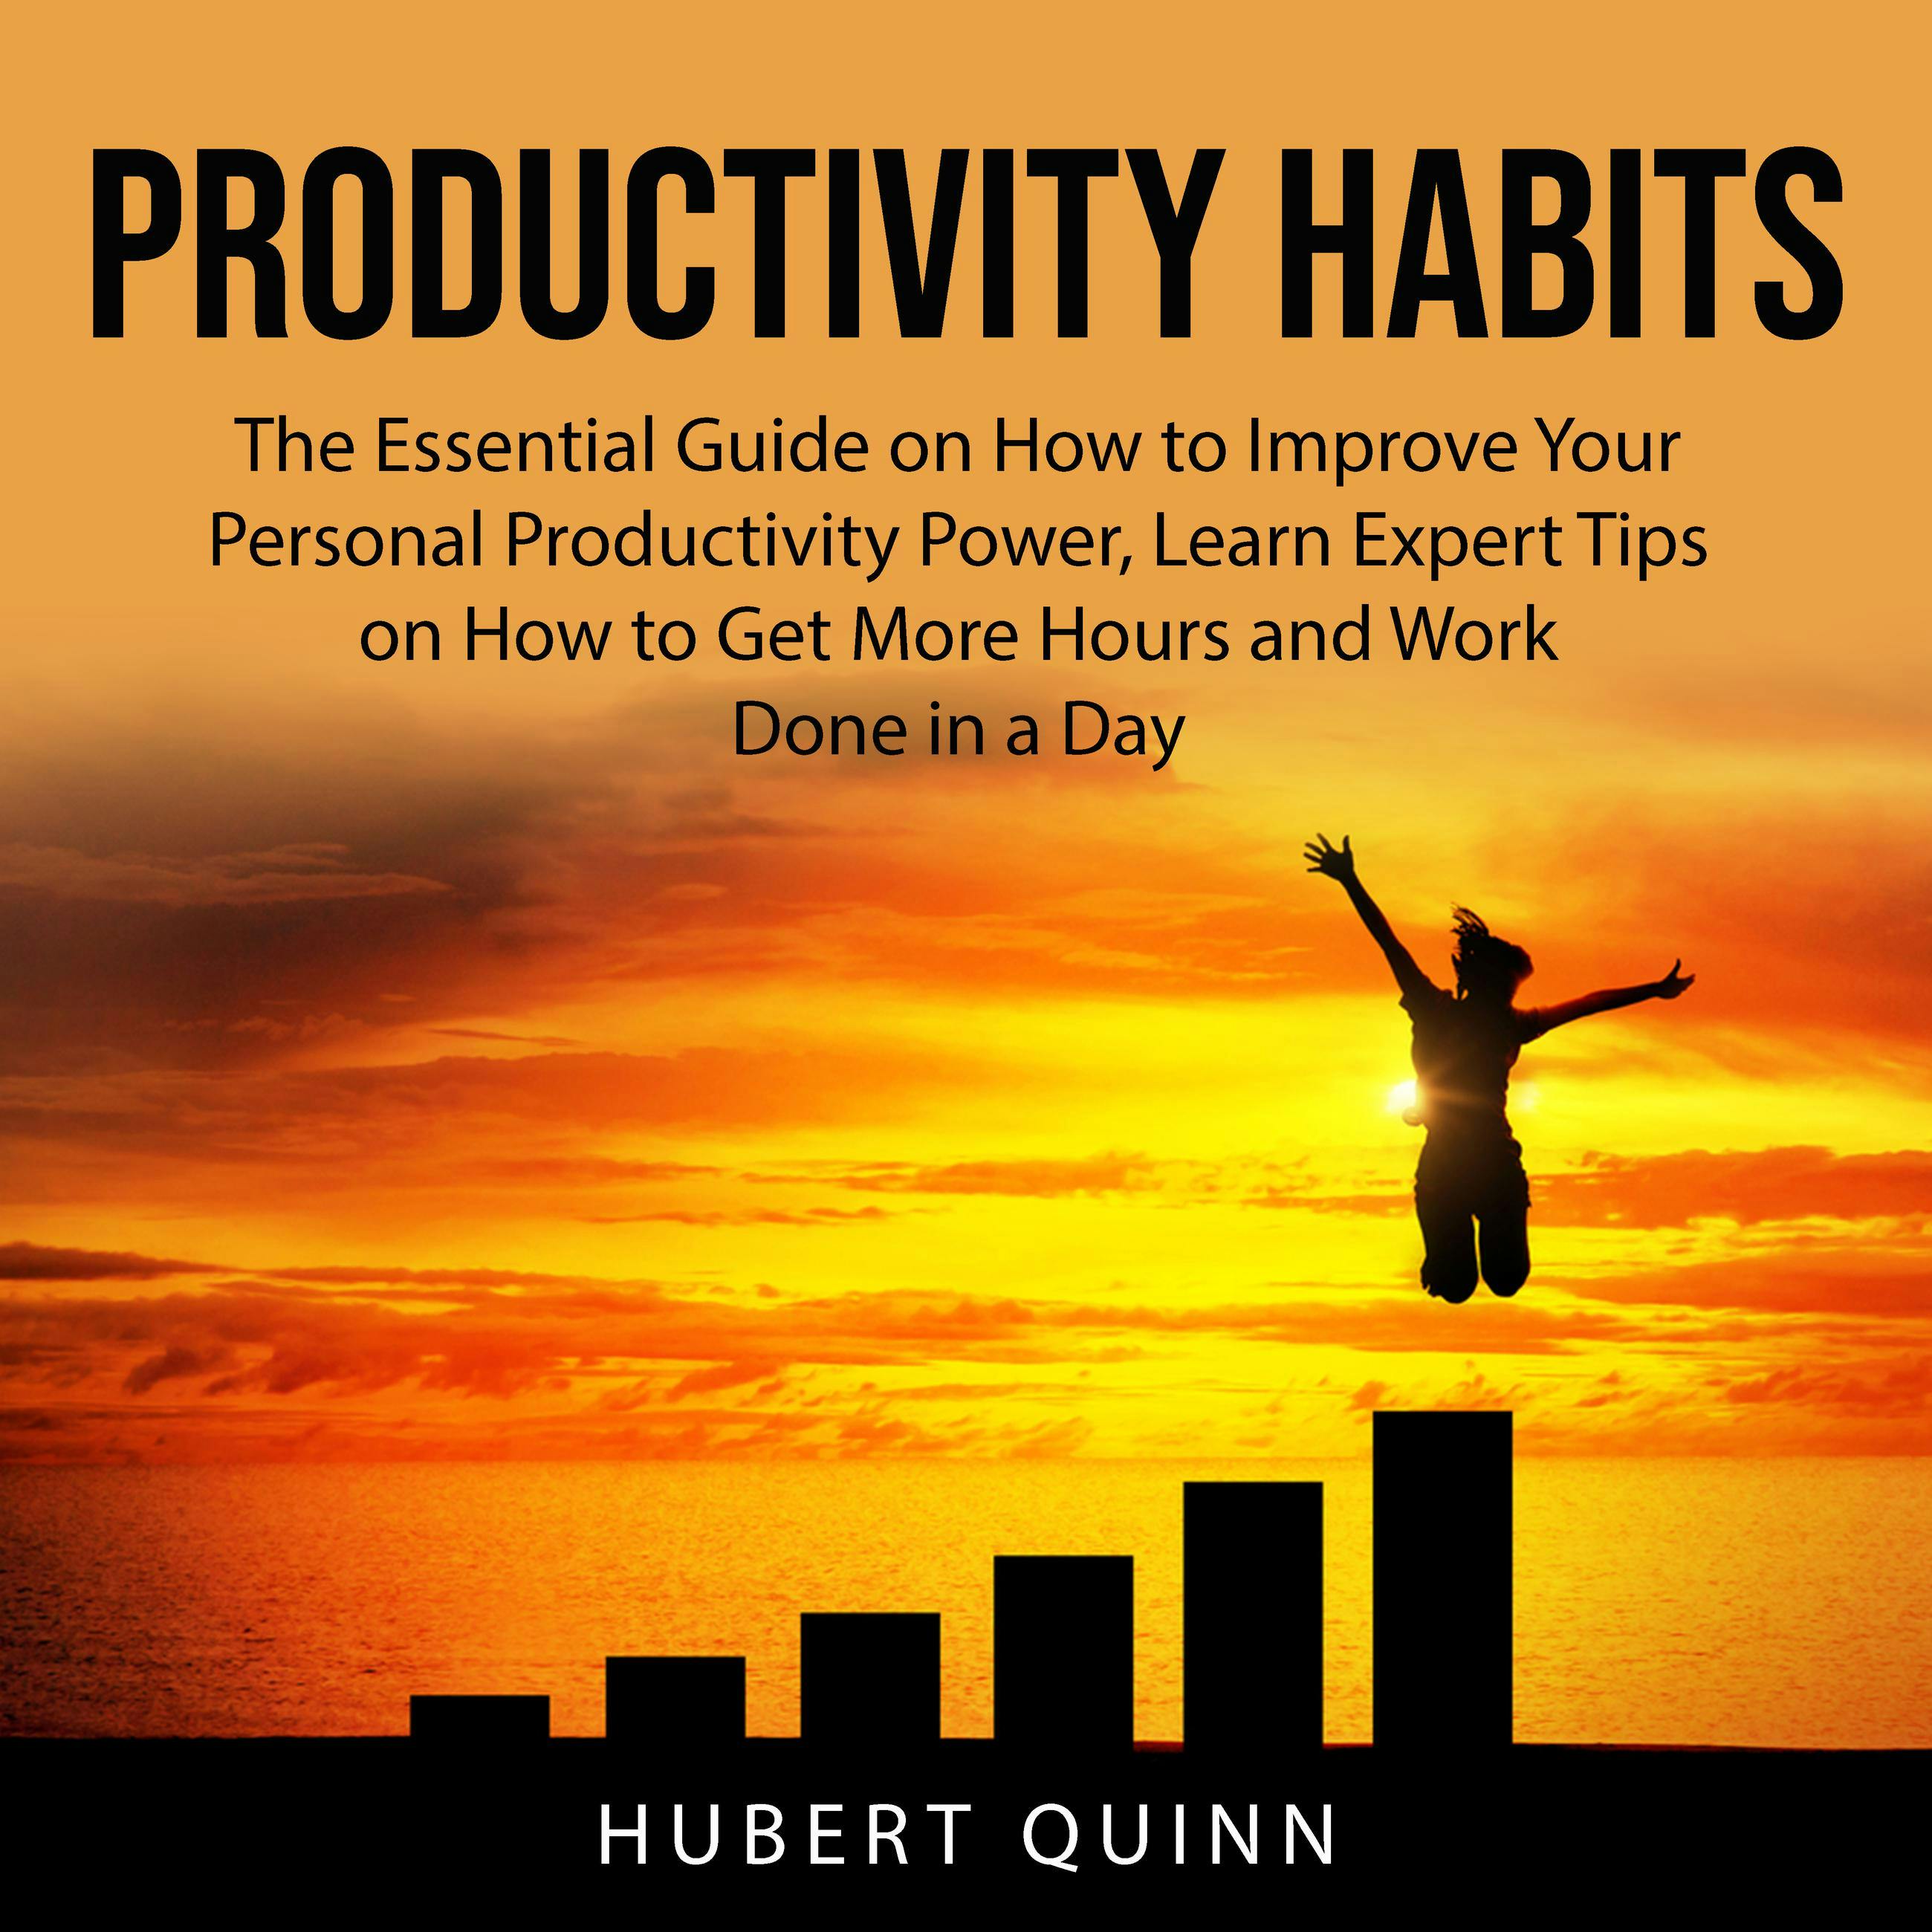 Productivity Habits: The Essential Guide on How to Improve Your Personal Productivity Power, Learn Expert Tips on How to Get More Hours and Work Done in a Day - undefined